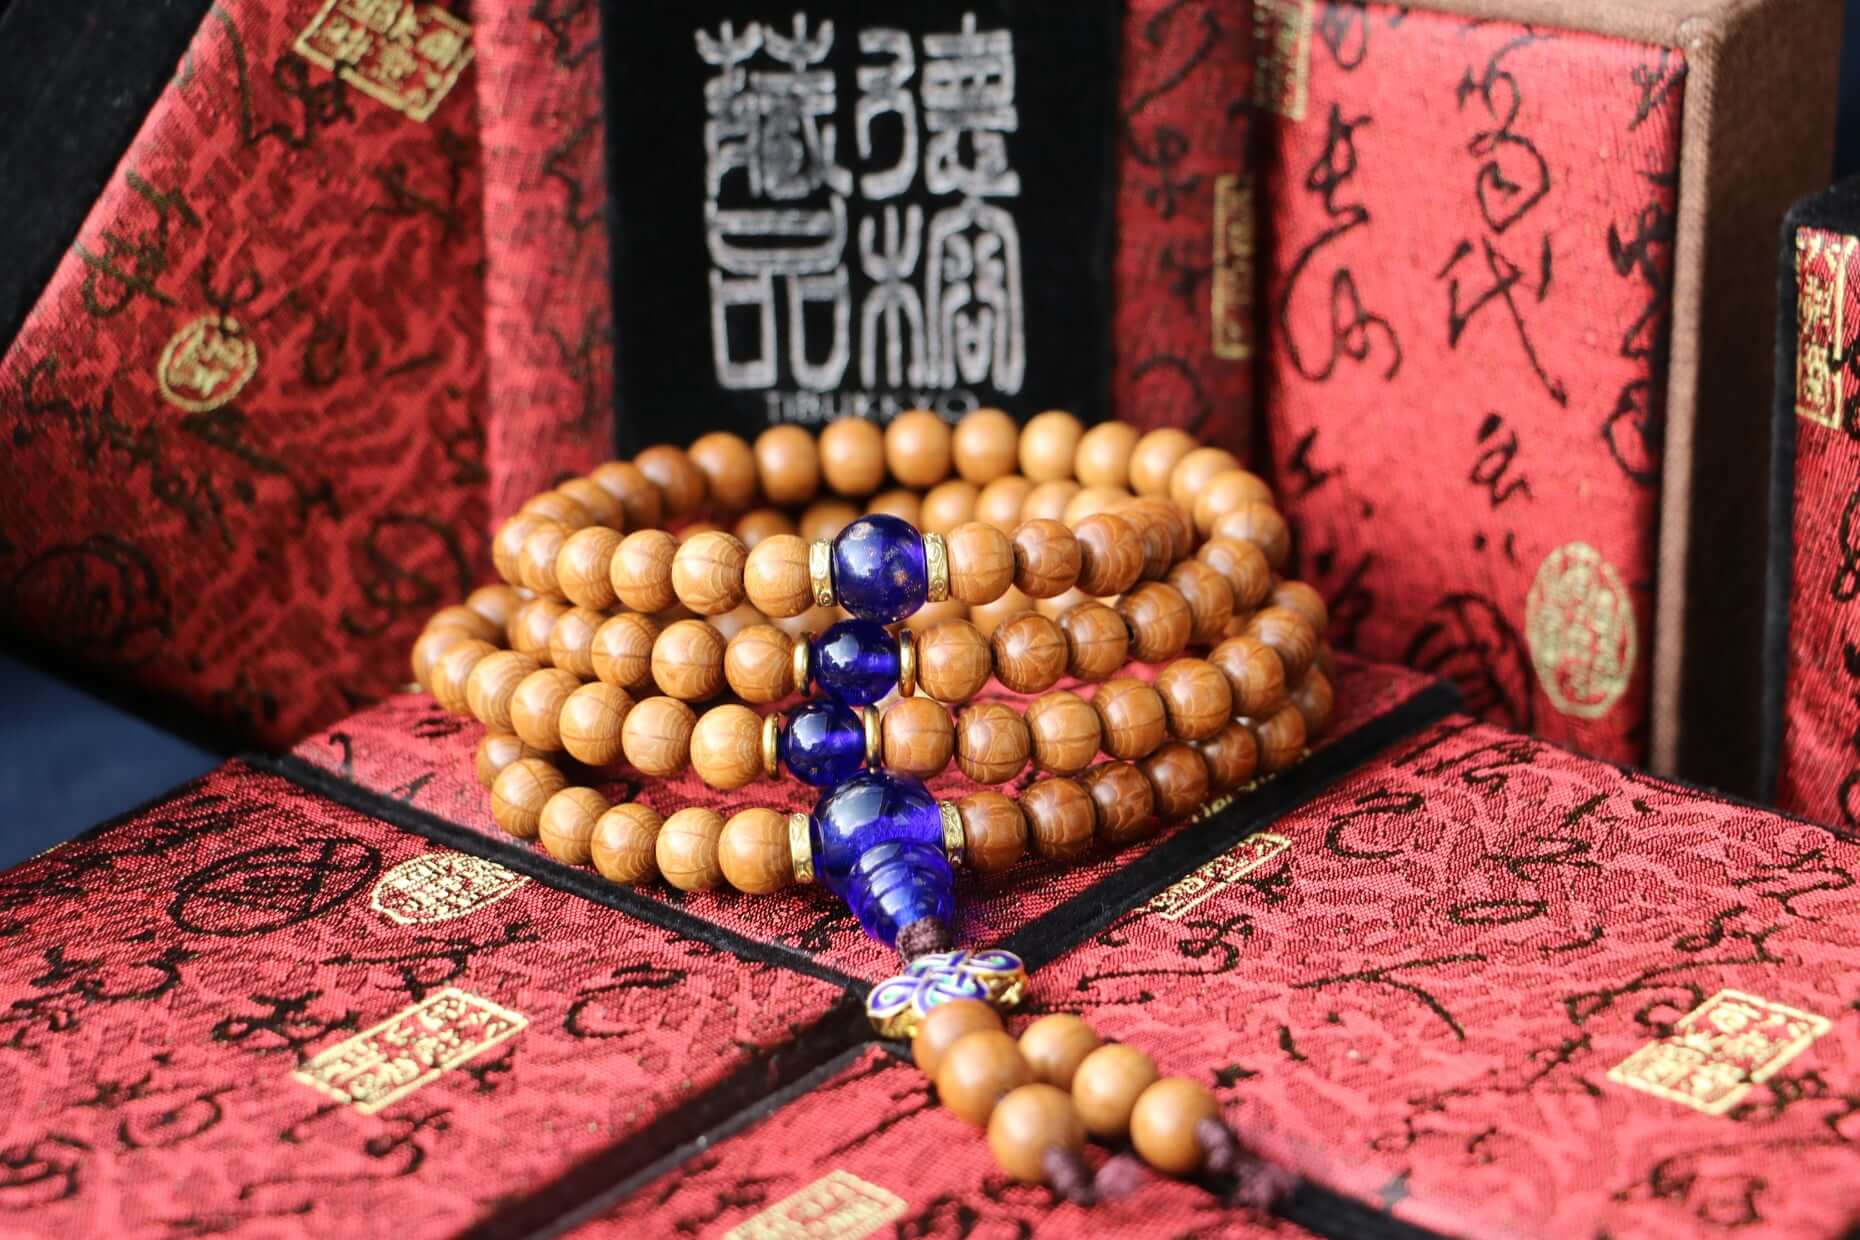 Taiwan Derong Collection｜Seiko old material full of flowers six wood rosary beads 8mm108 pieces｜Blue glass｜Cloisonne back cloud